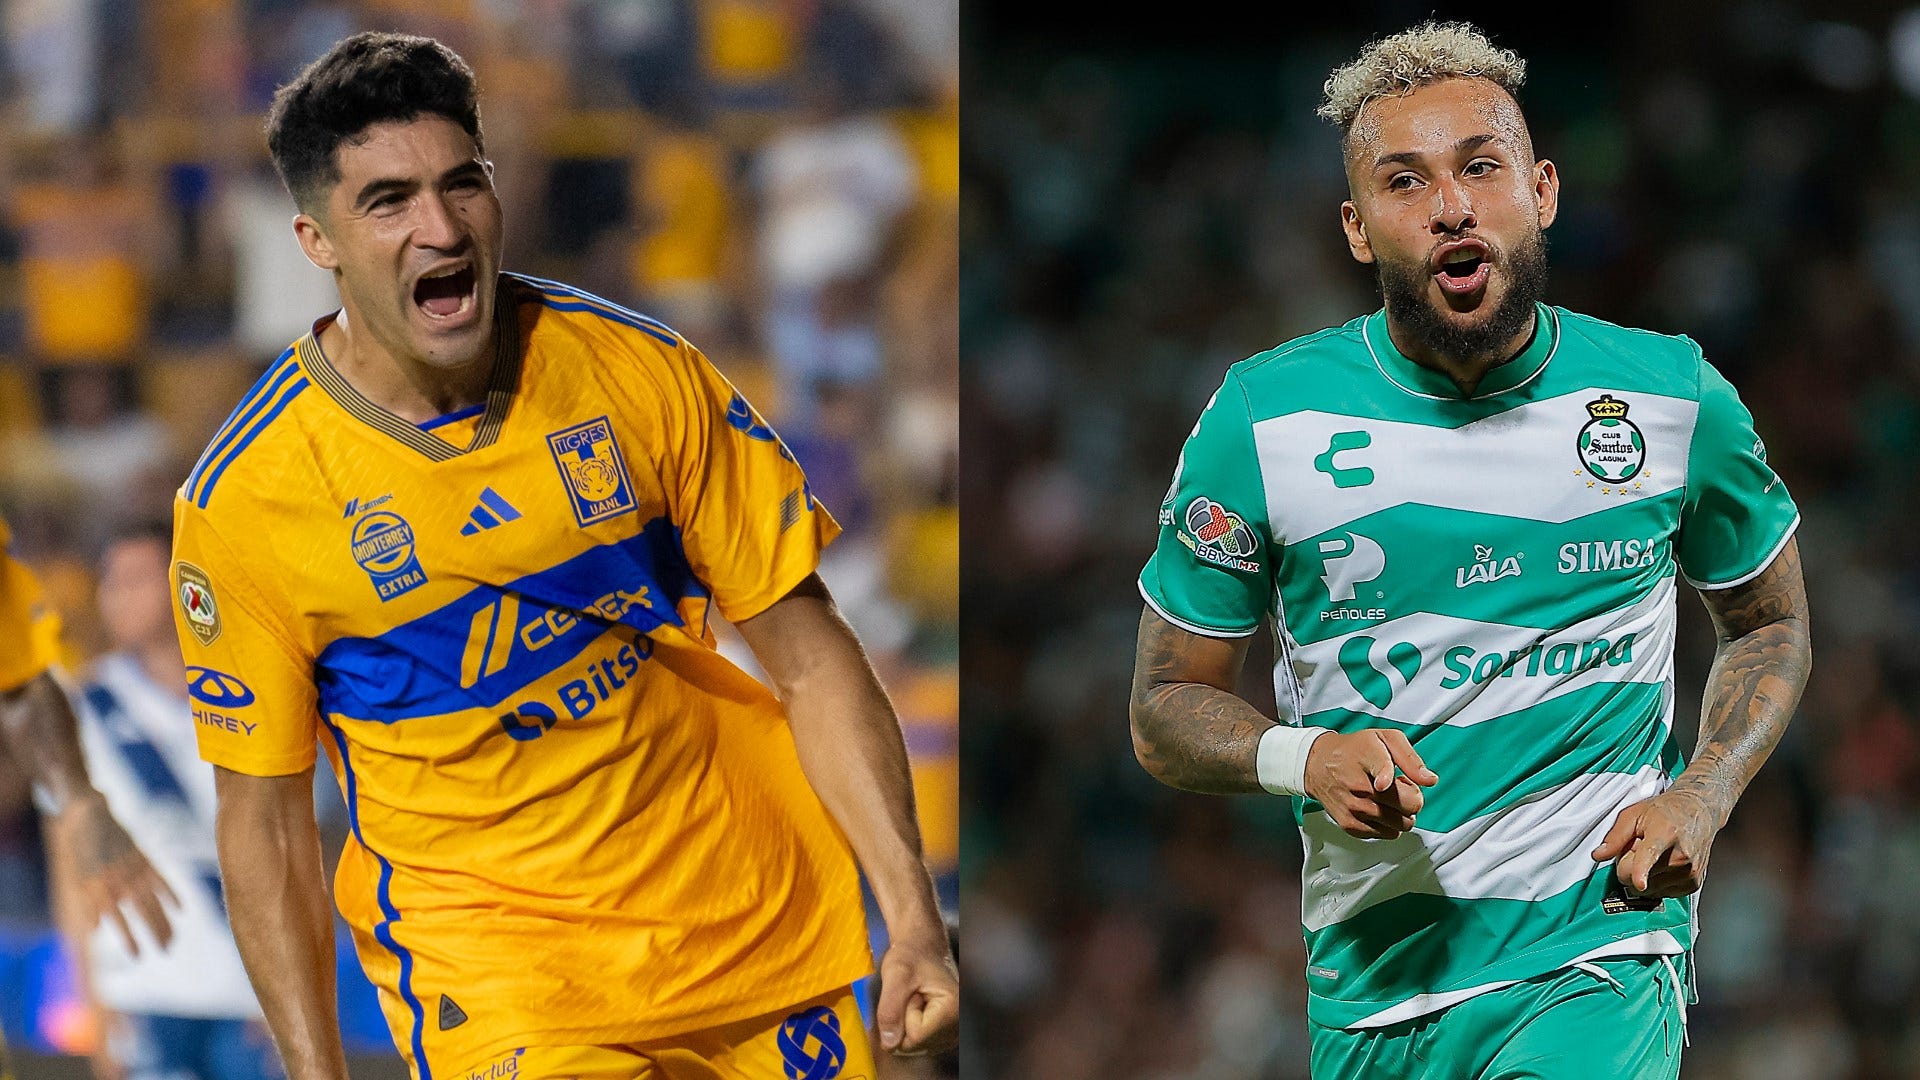 Tigres vs Santos Laguna Where to watch the match online, live stream, TV channels, and kick-off time Goal US